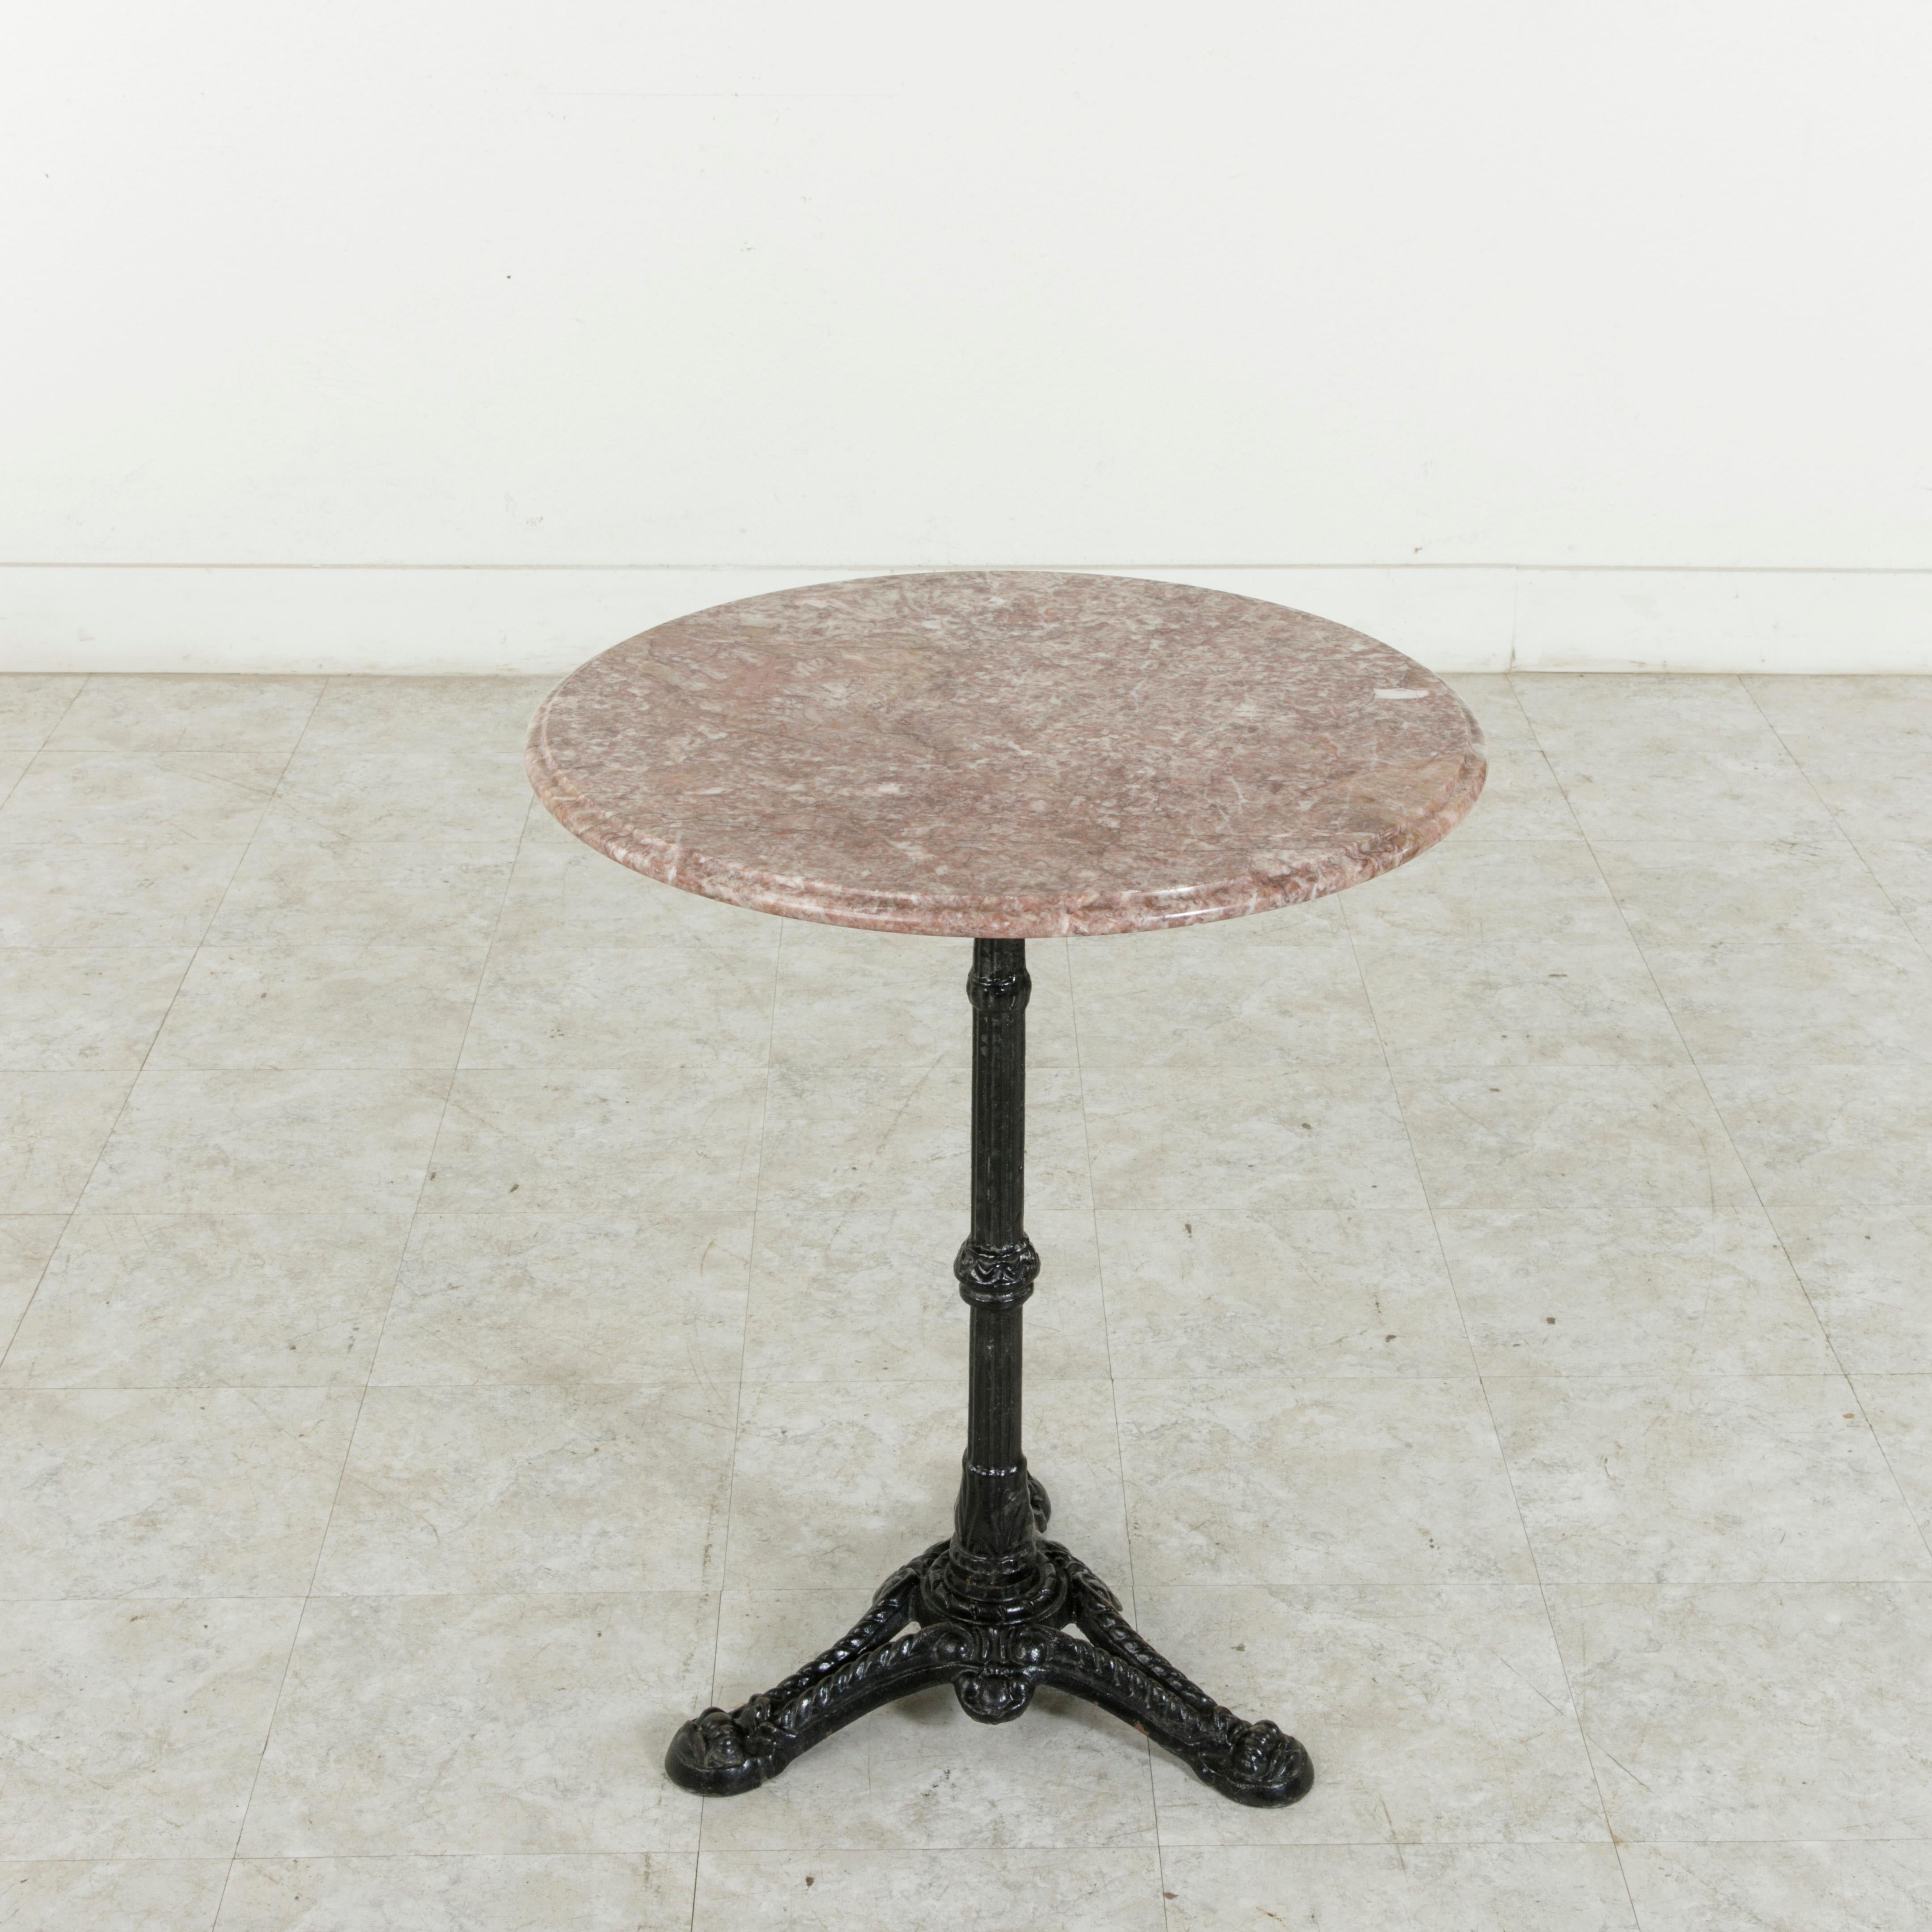 This French round bistro table from the turn of the twentieth century features a heavy cast iron tripod base with shell motif. The fluted pedestal stem that supports the bevelled rose marble tabletop is adorned with acanthus leaves. Reminiscent of